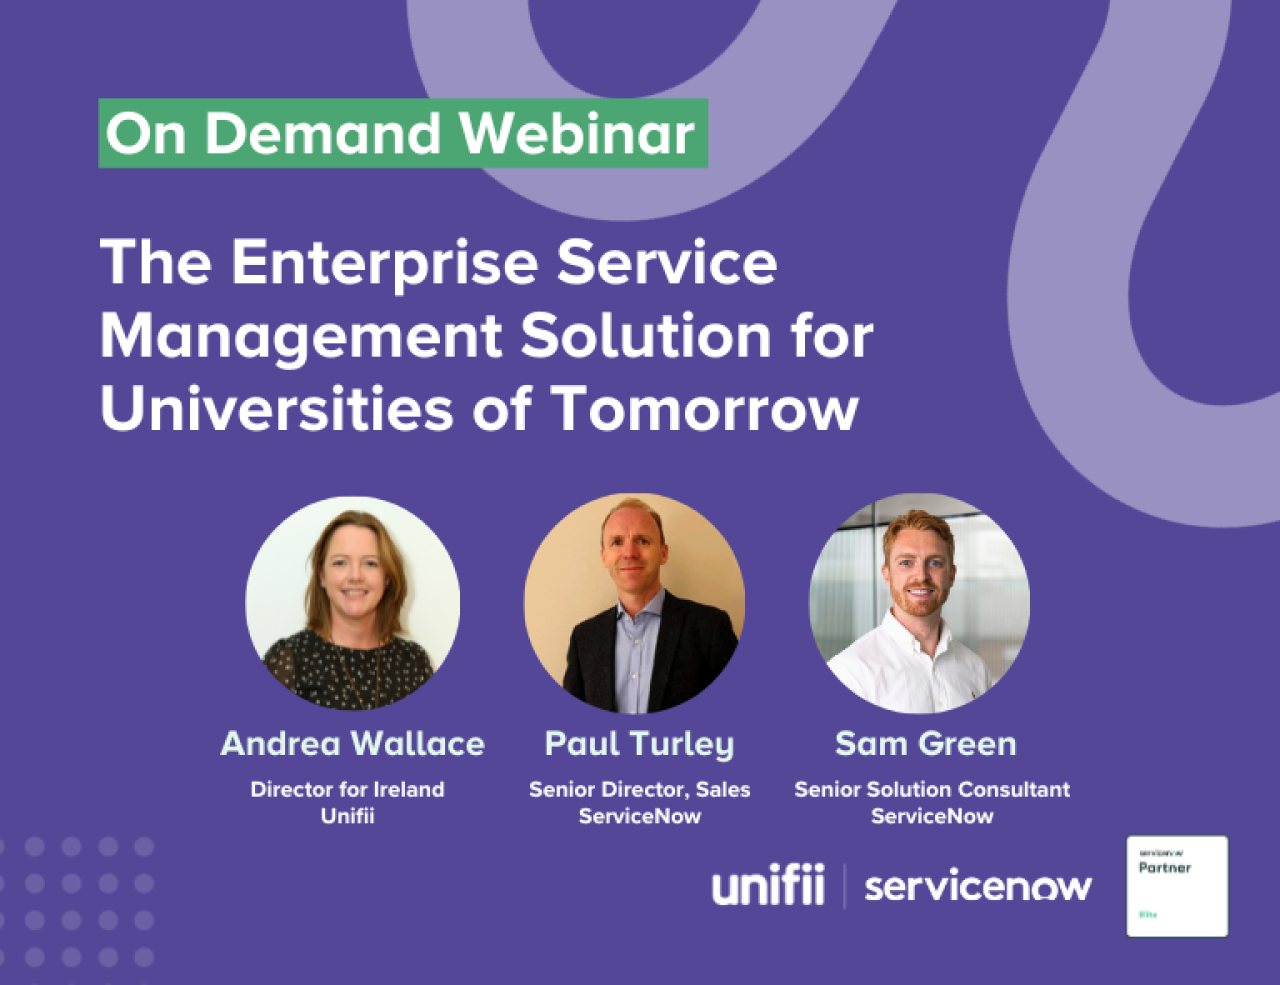 The Enterprise Service Management Solution for Universities of Tomorrow.